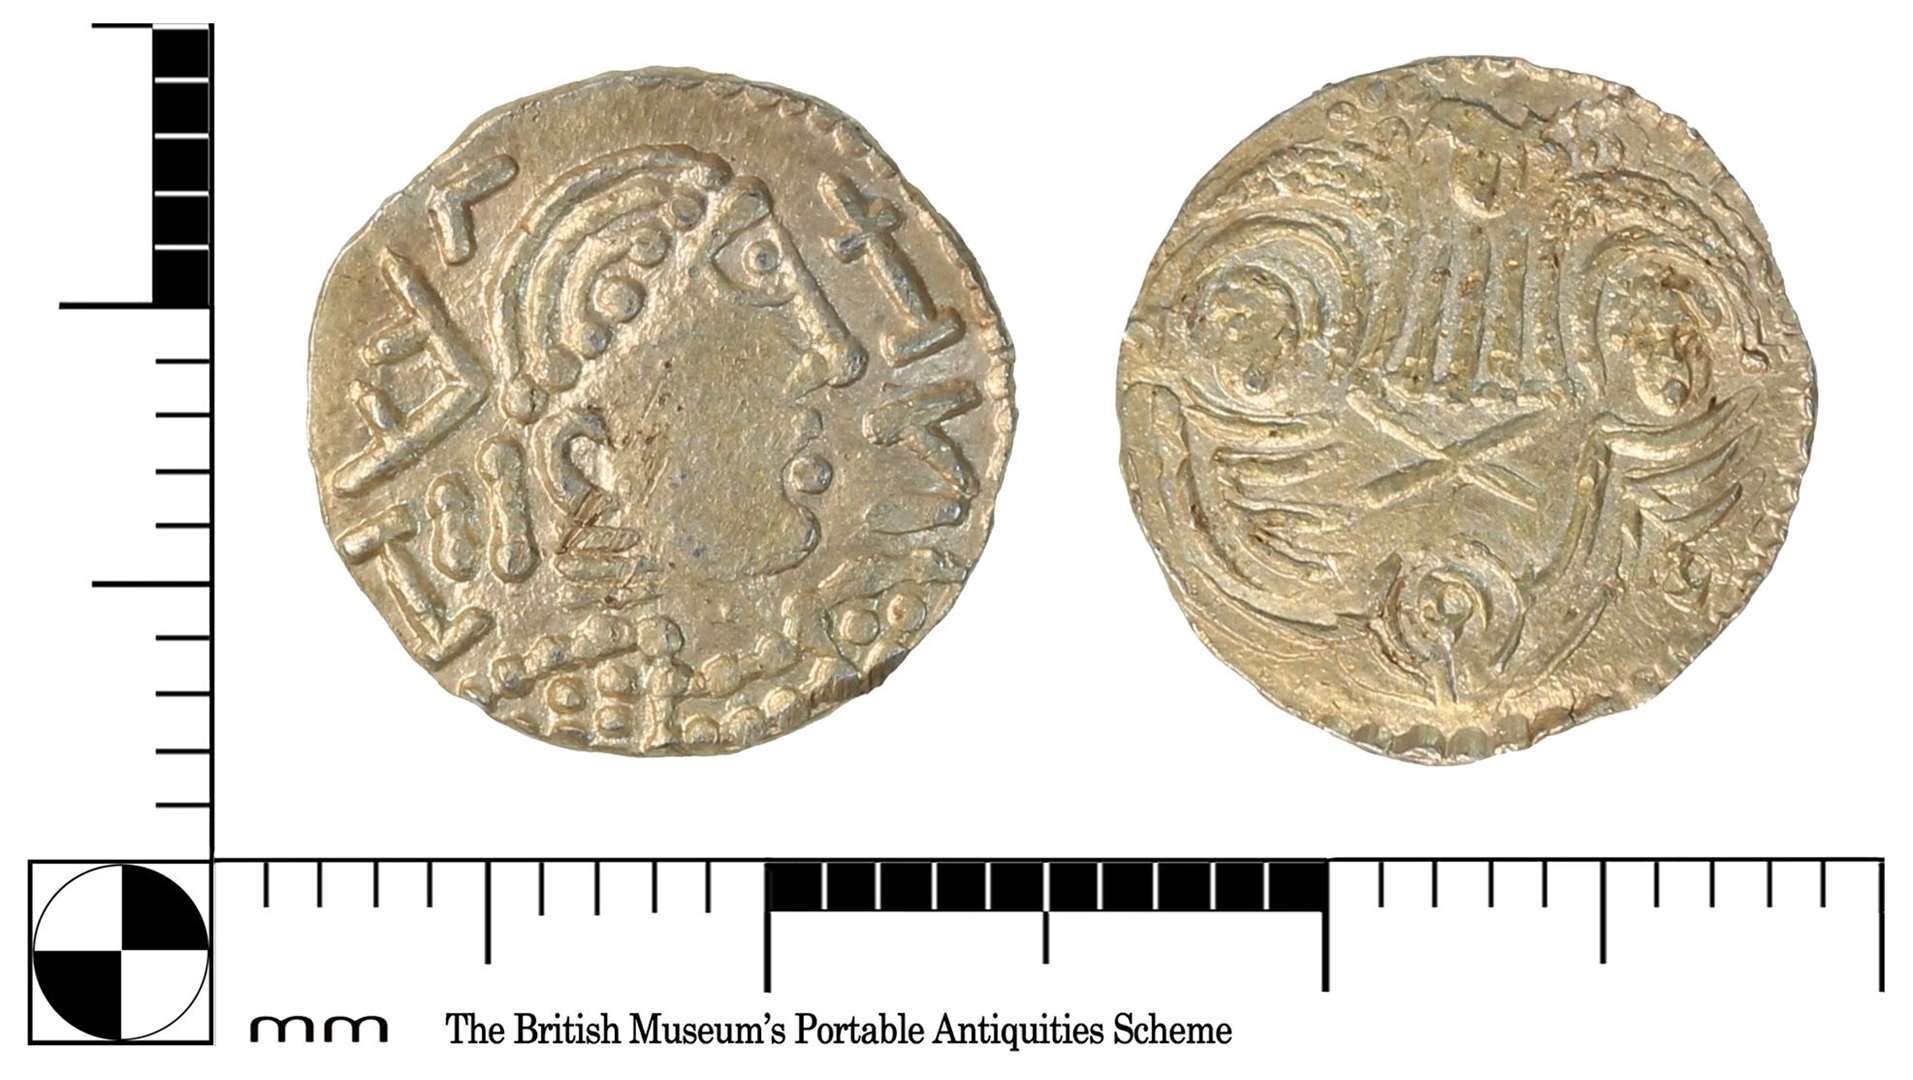 Coin 3: An early-medieval gold tremissis (pale shilling) of the 'Two Emperors' type. Image: Jo Ahmet KCC finds officer